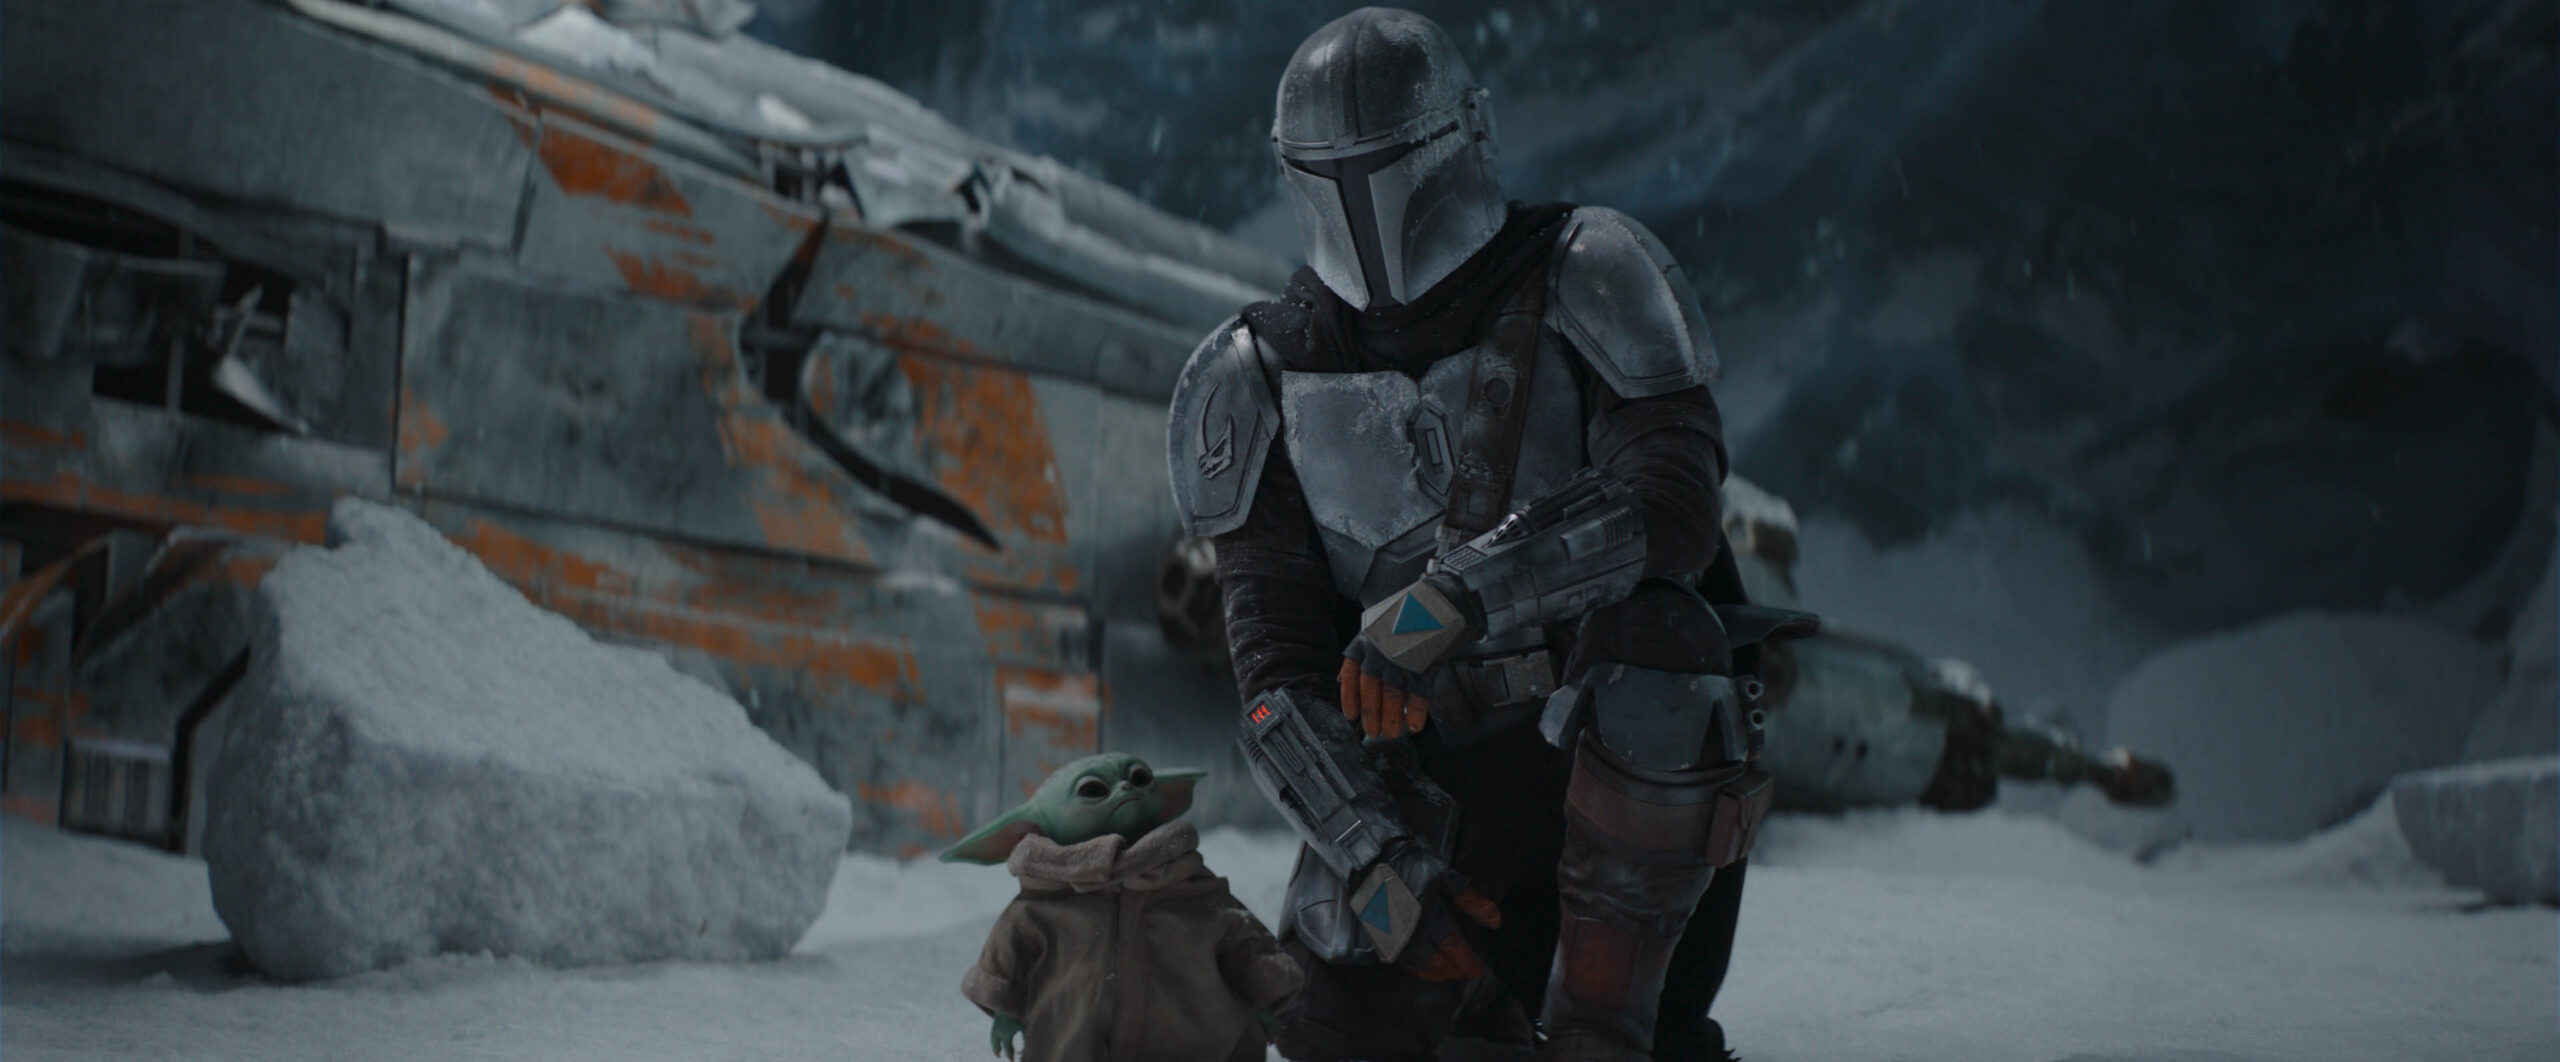 Extended Q&A: The Visual Effects and Virtual Production of ‘The Mandalorian’